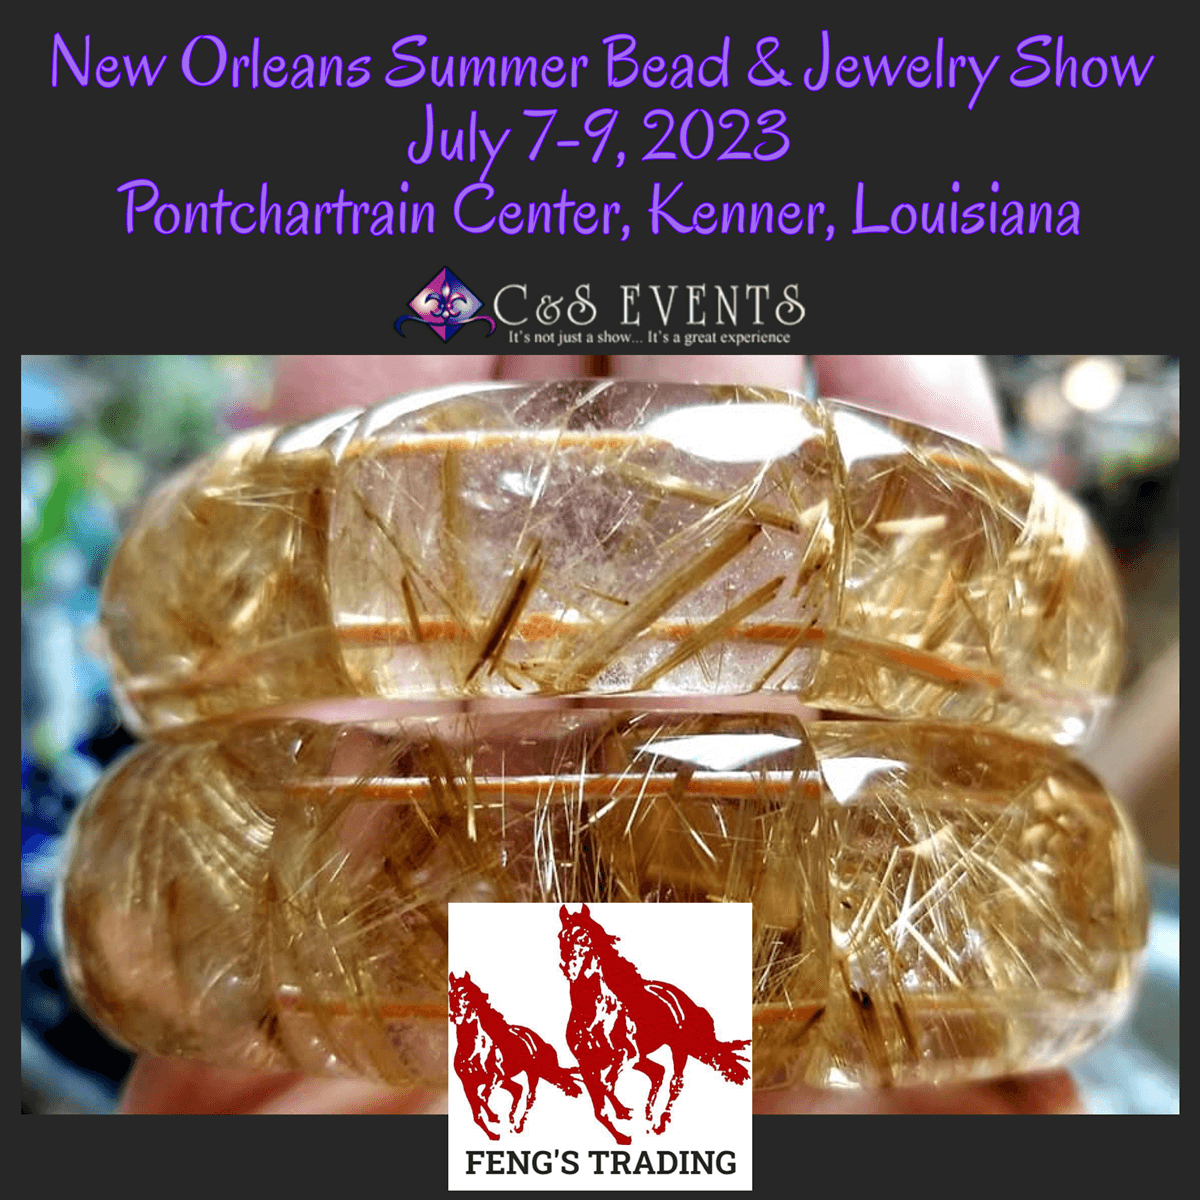 New Orleans Summer Bead & Jewelry Show 2023